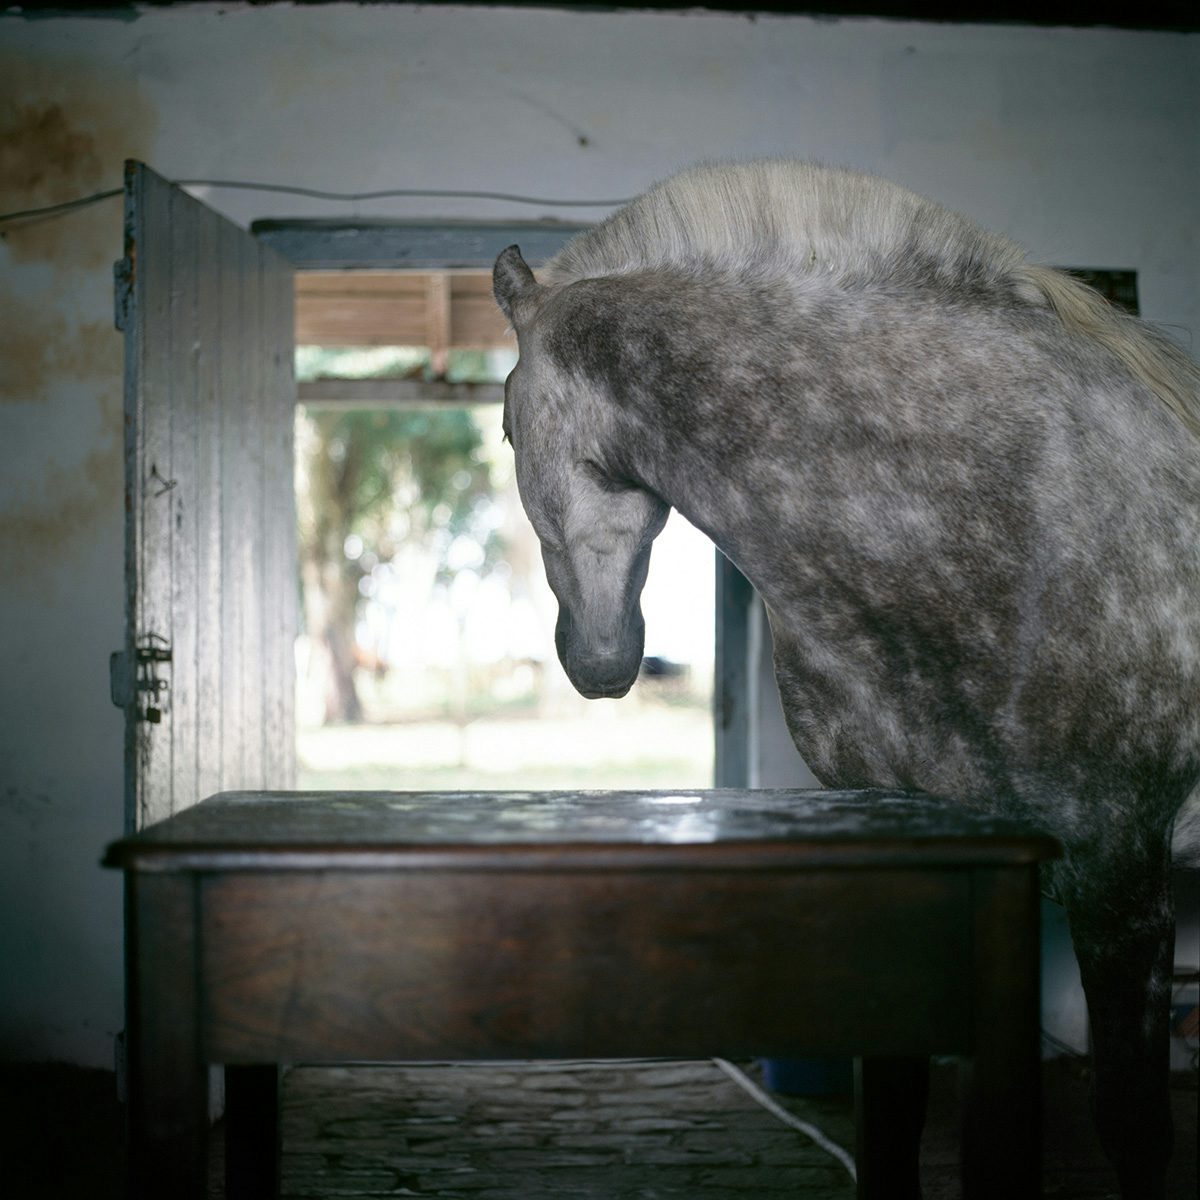 Photograph by Alessandra Sanguinetti of a grey spotted horse looking through a barn door stood next to a table